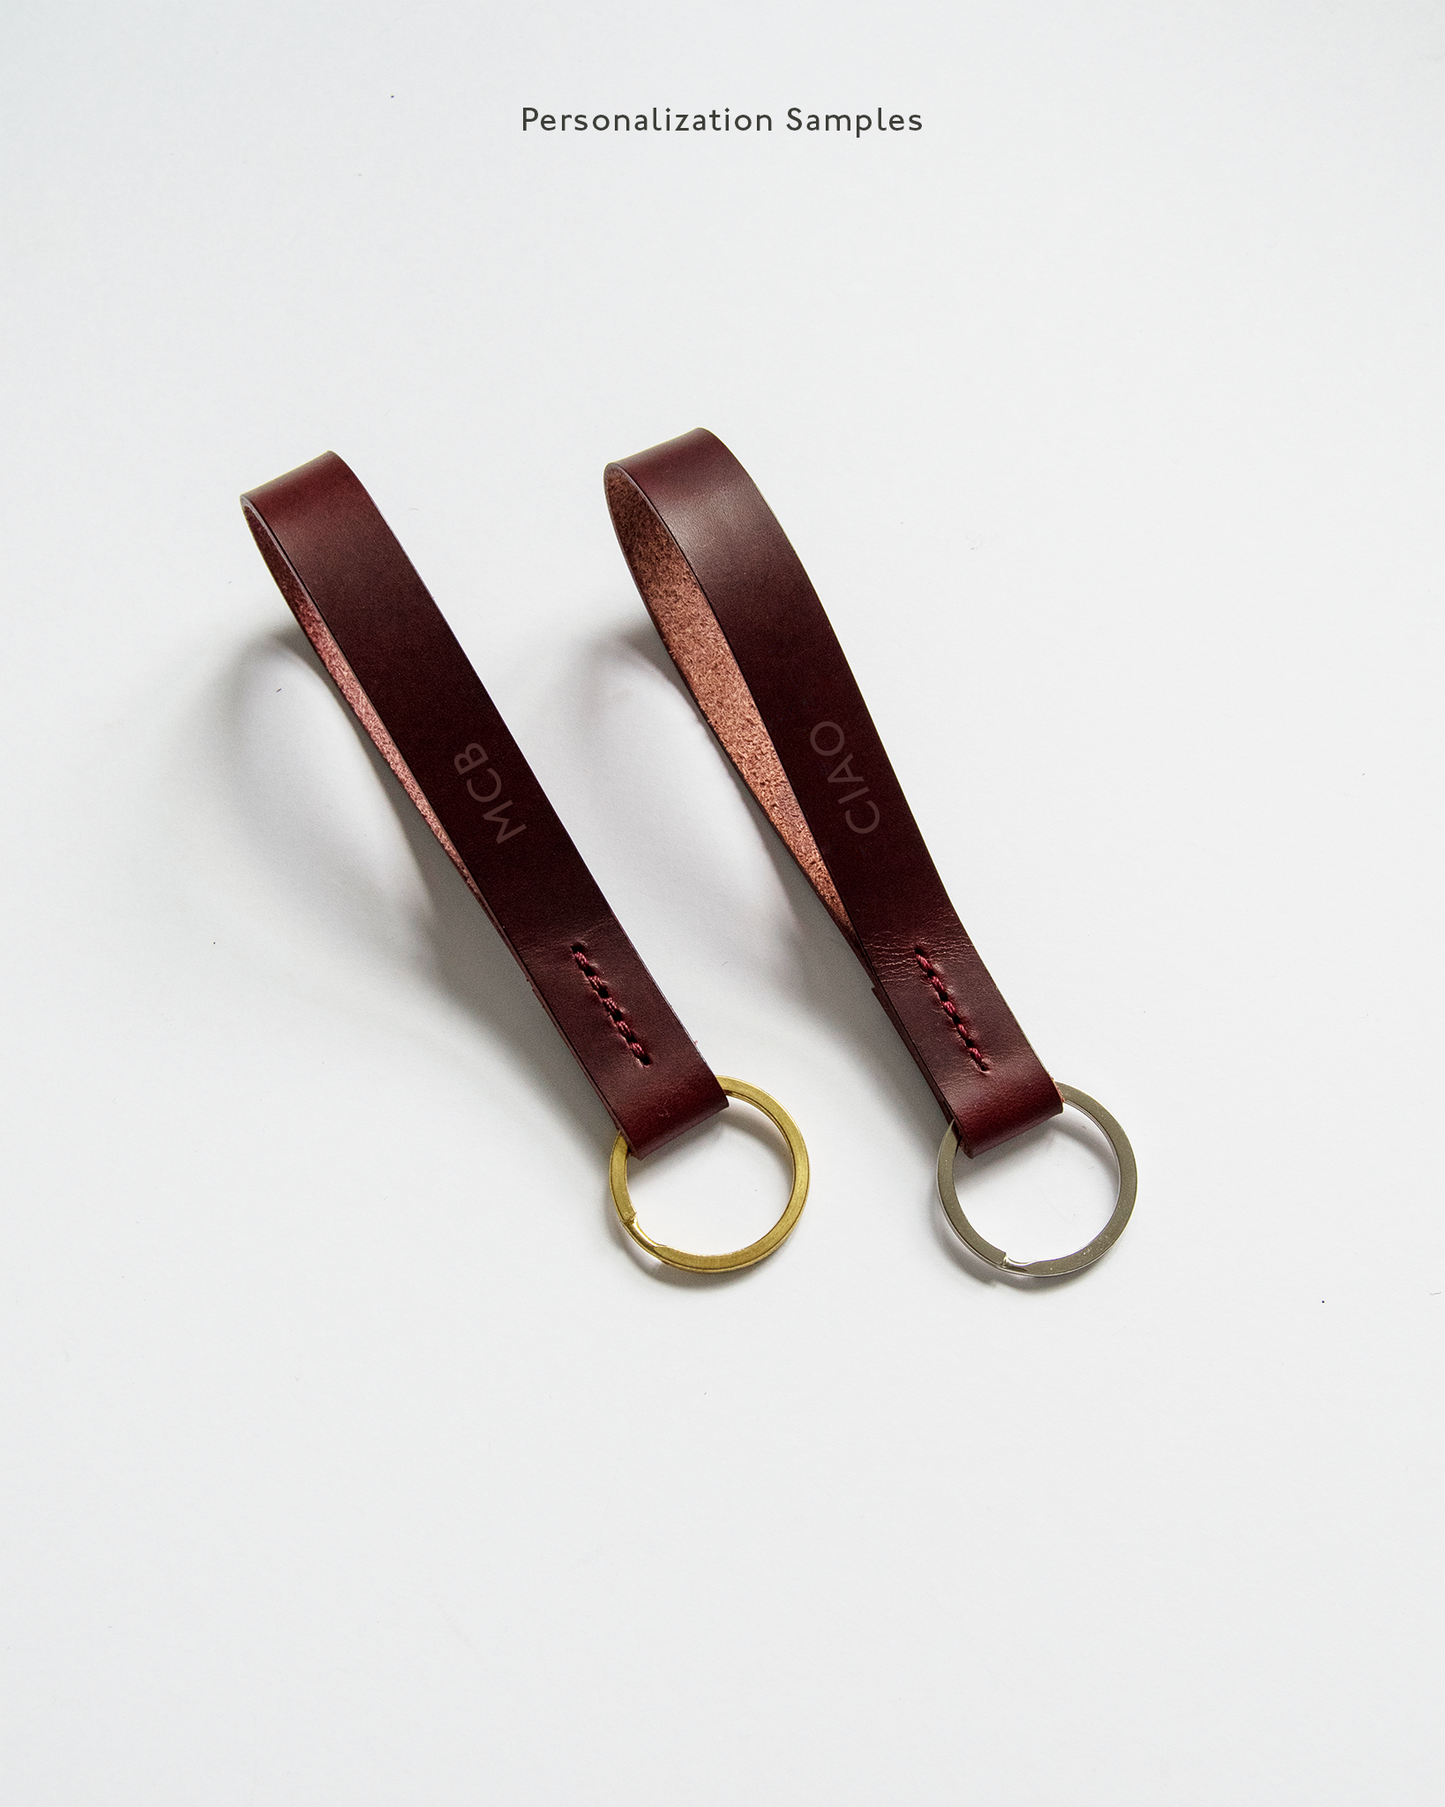 Leather Key Fob in Bordeaux